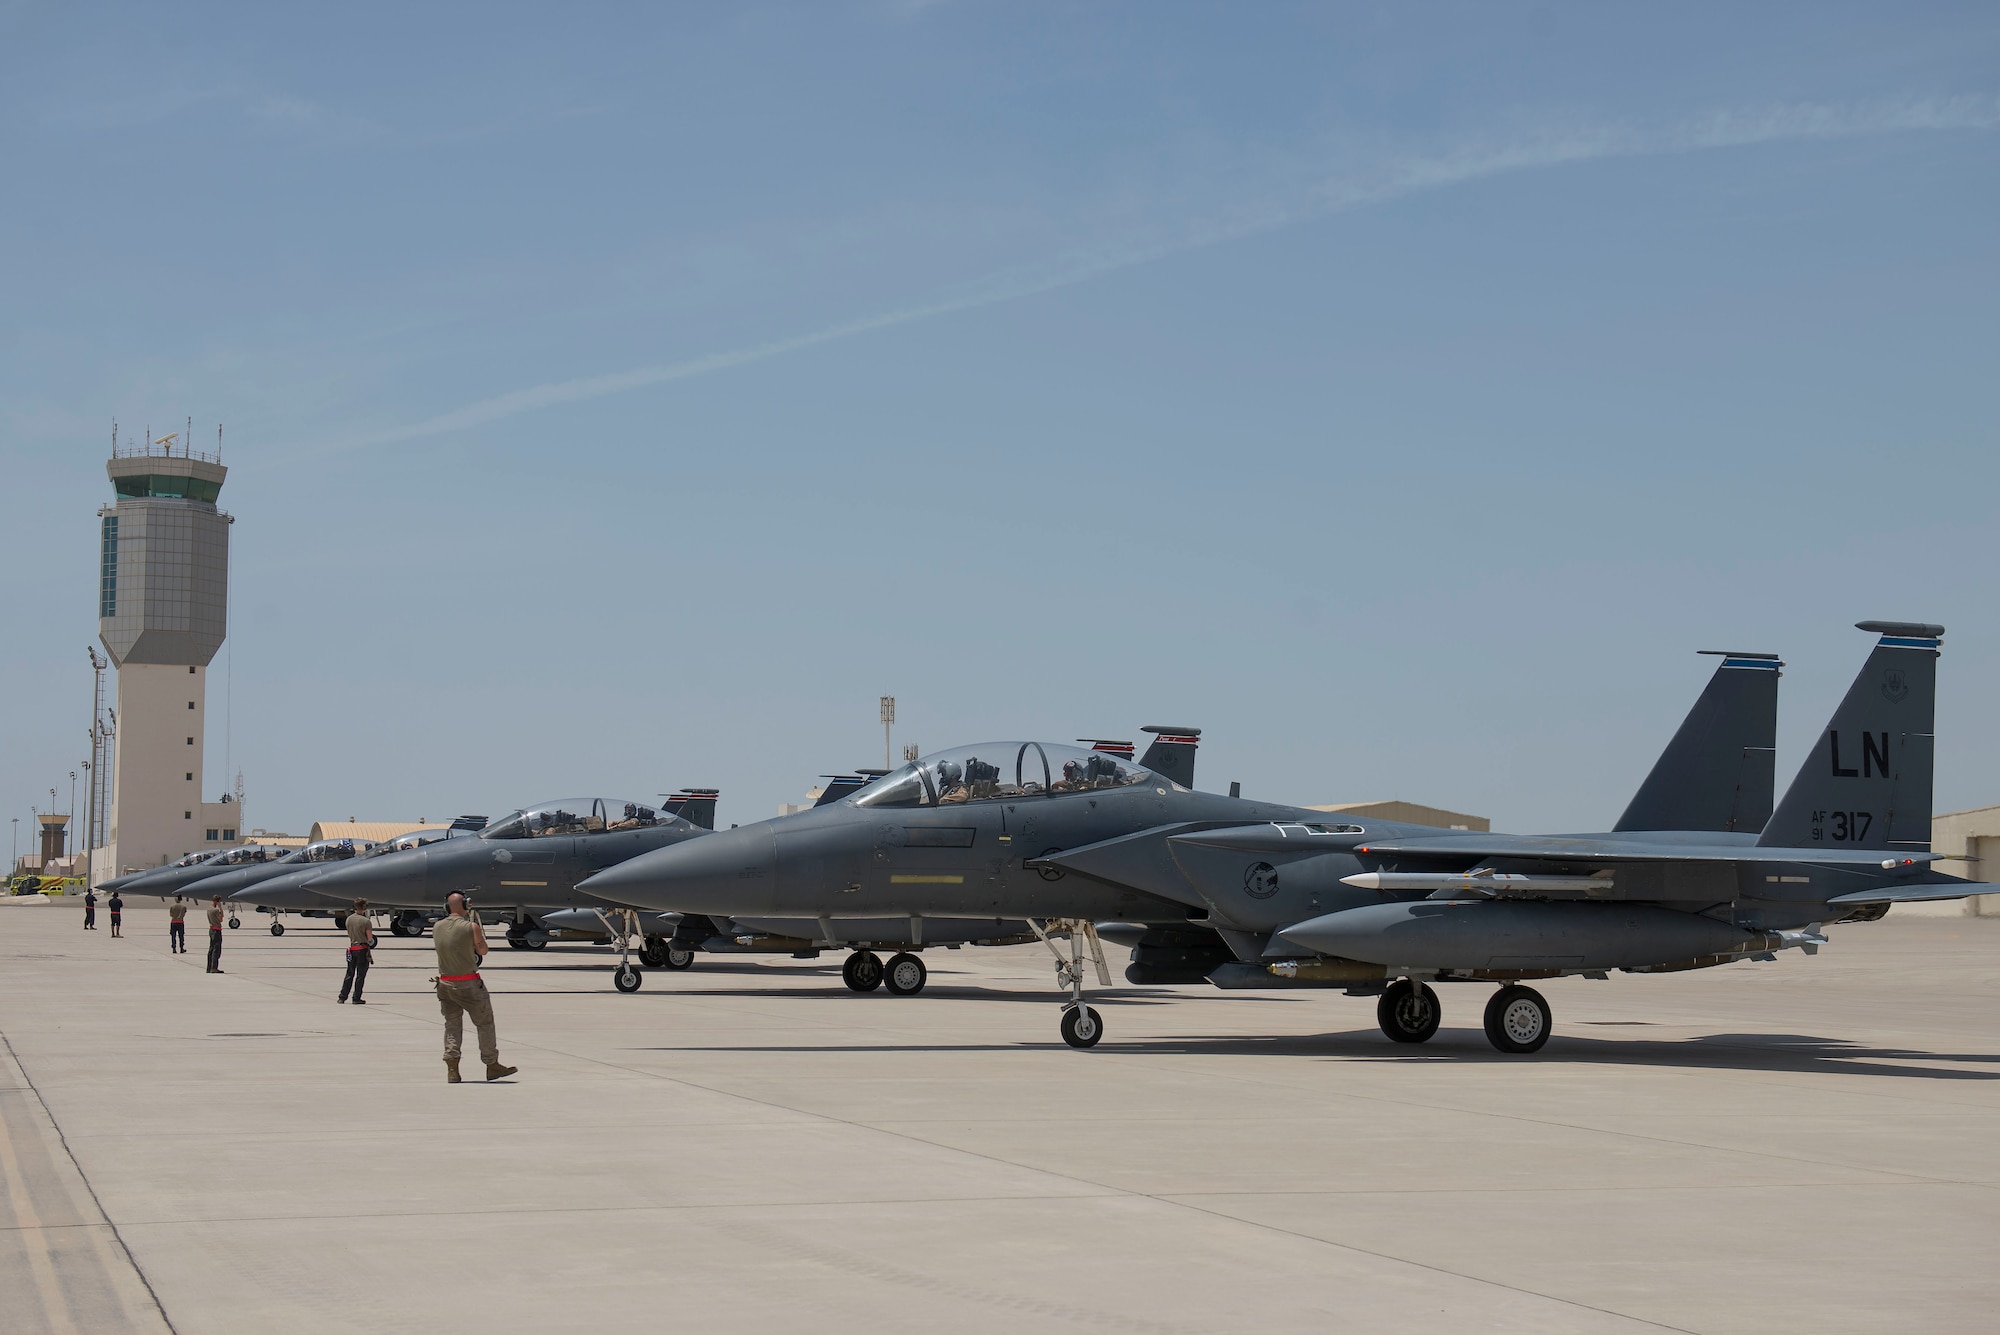 Six F-15E Strike Eagles assigned to the 494th Expeditionary Fighter Squadron (EFS) line up on the flightline at Al Dhafra Air Base, United Arab Emirates, April 25, 2021.